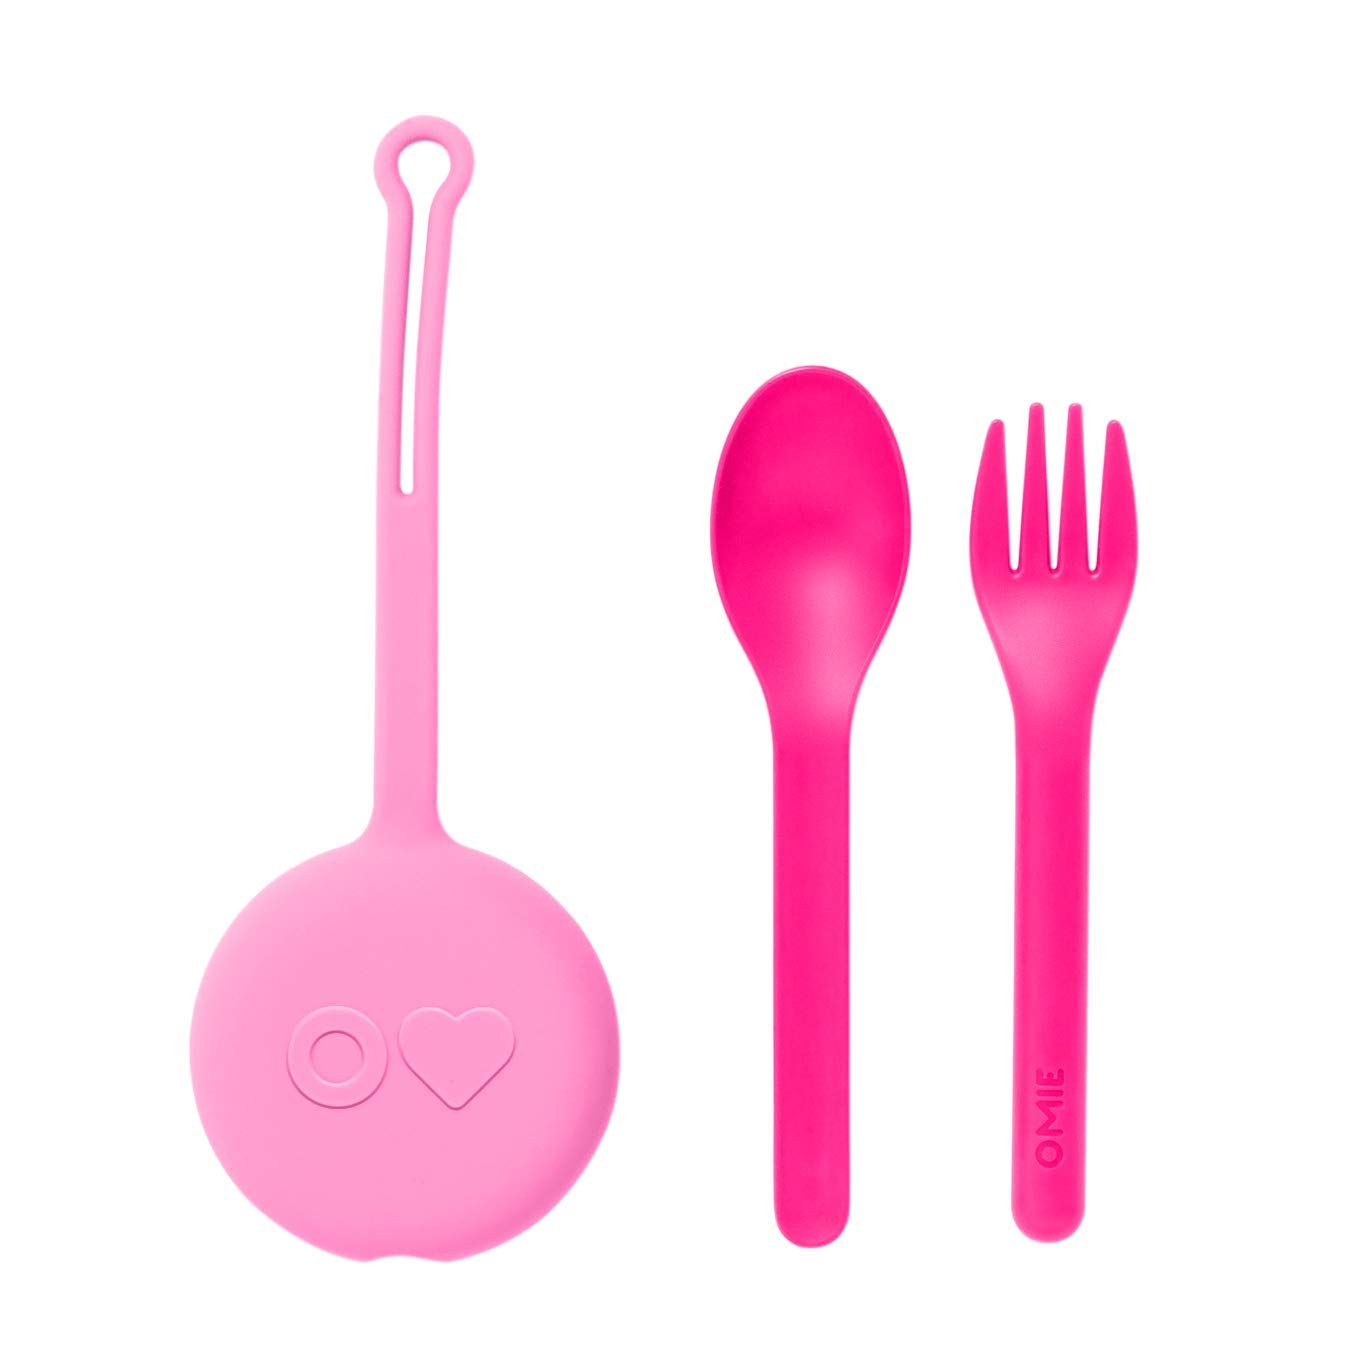 OmieBox Accessories Collection - Fork, Spoon + Pod Set 